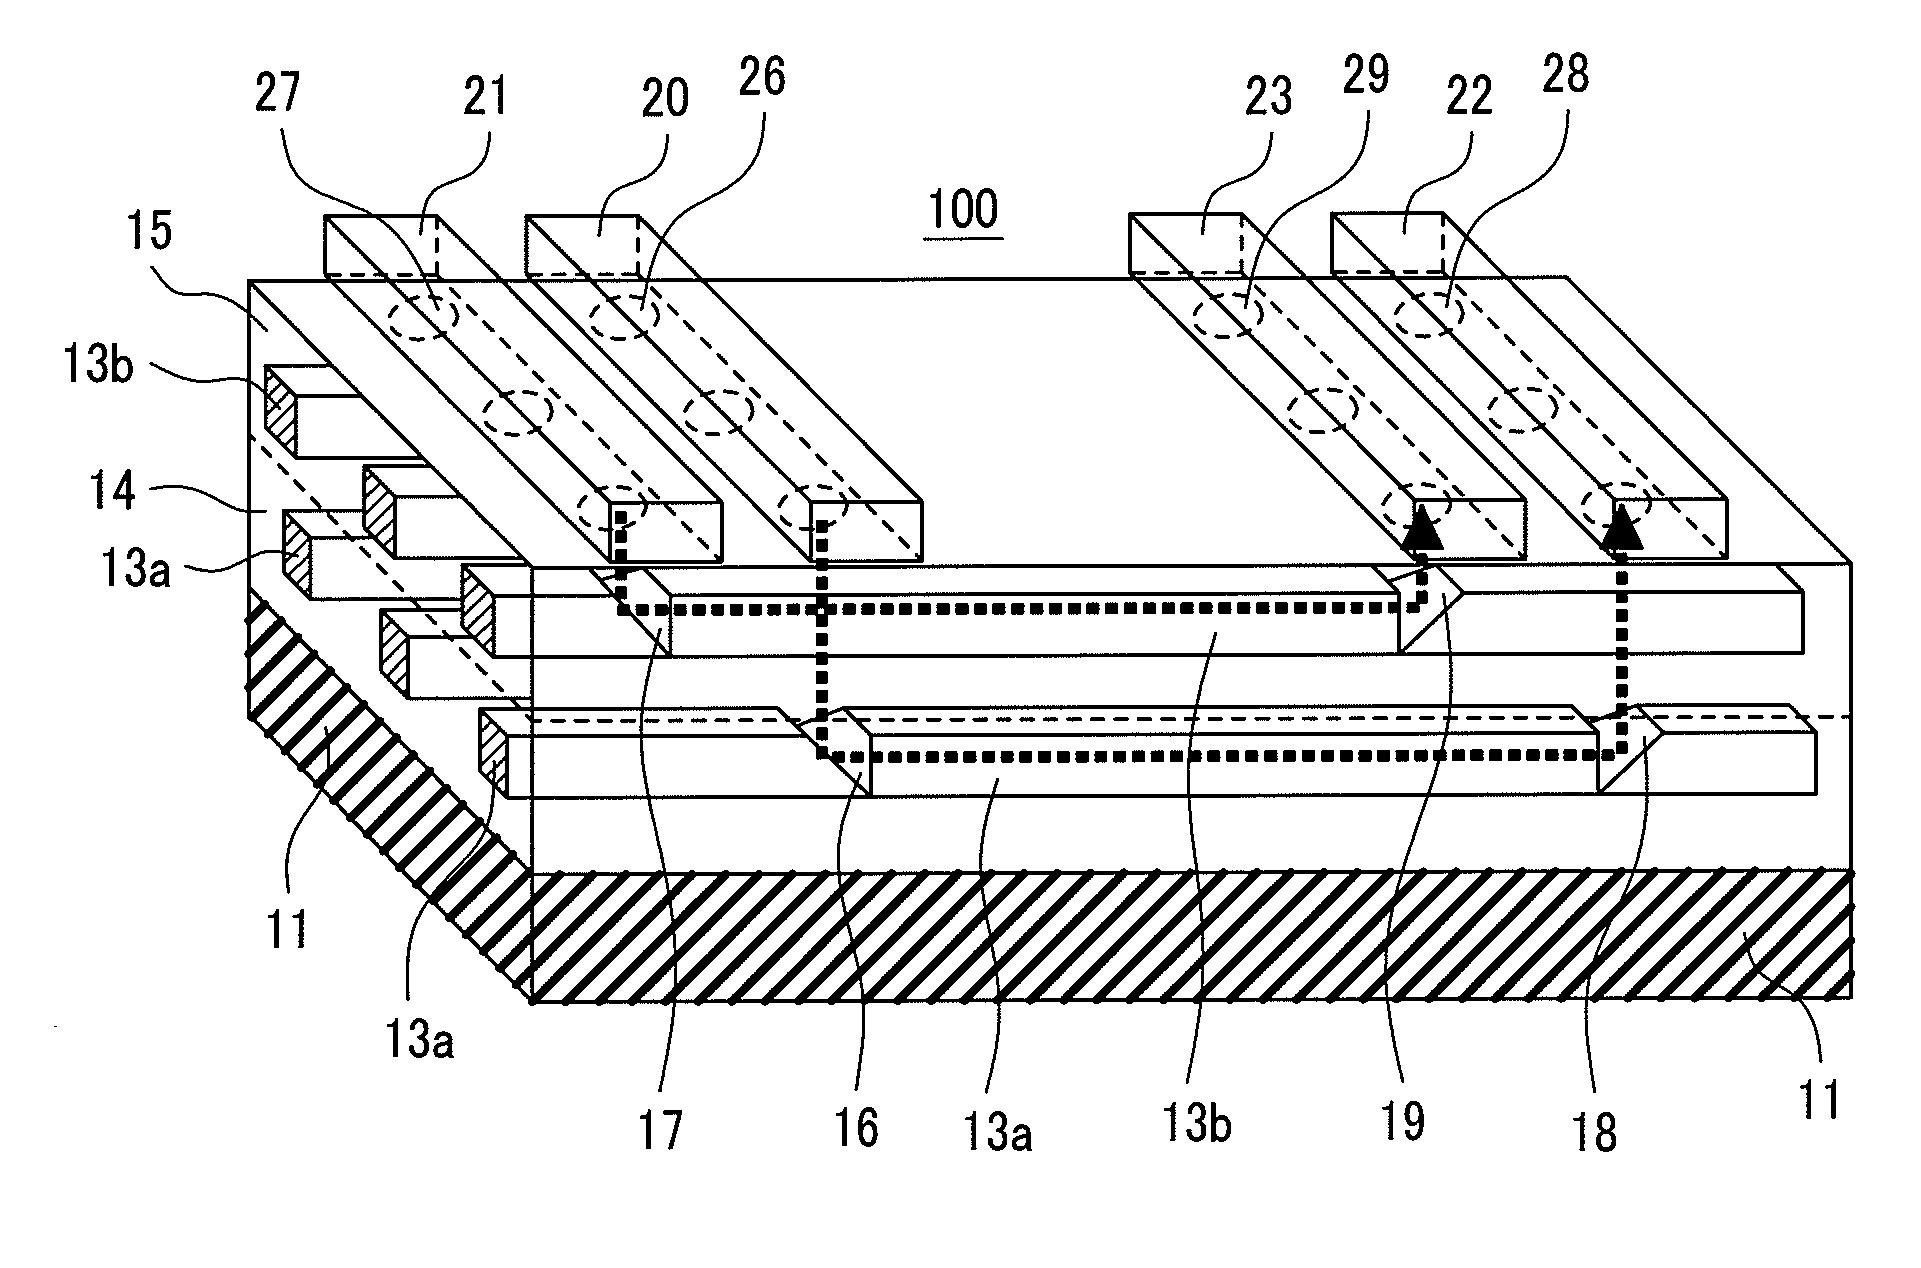 Optoelectronic integrated circuit board and communications device using the same